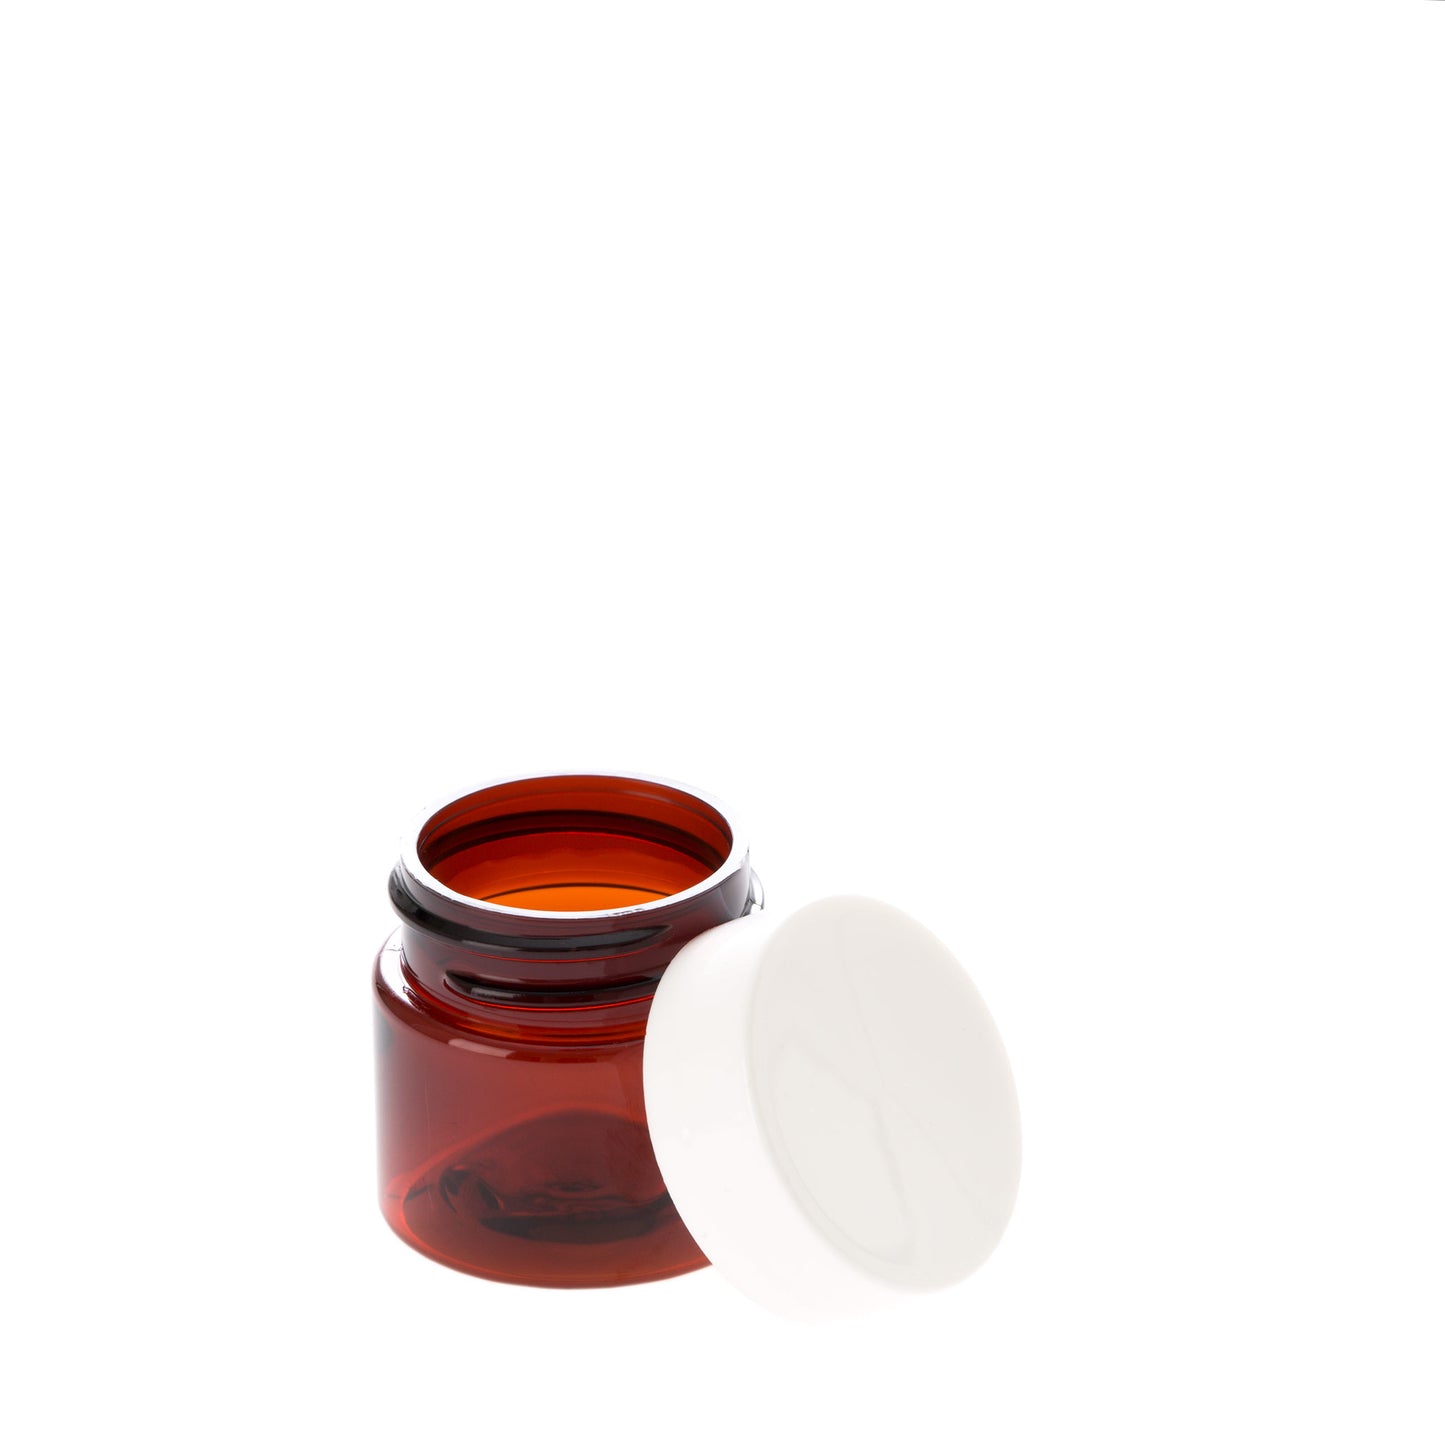 0.5 oz Straight Sided Amber Jar with White Flat Gloss Smooth Cap